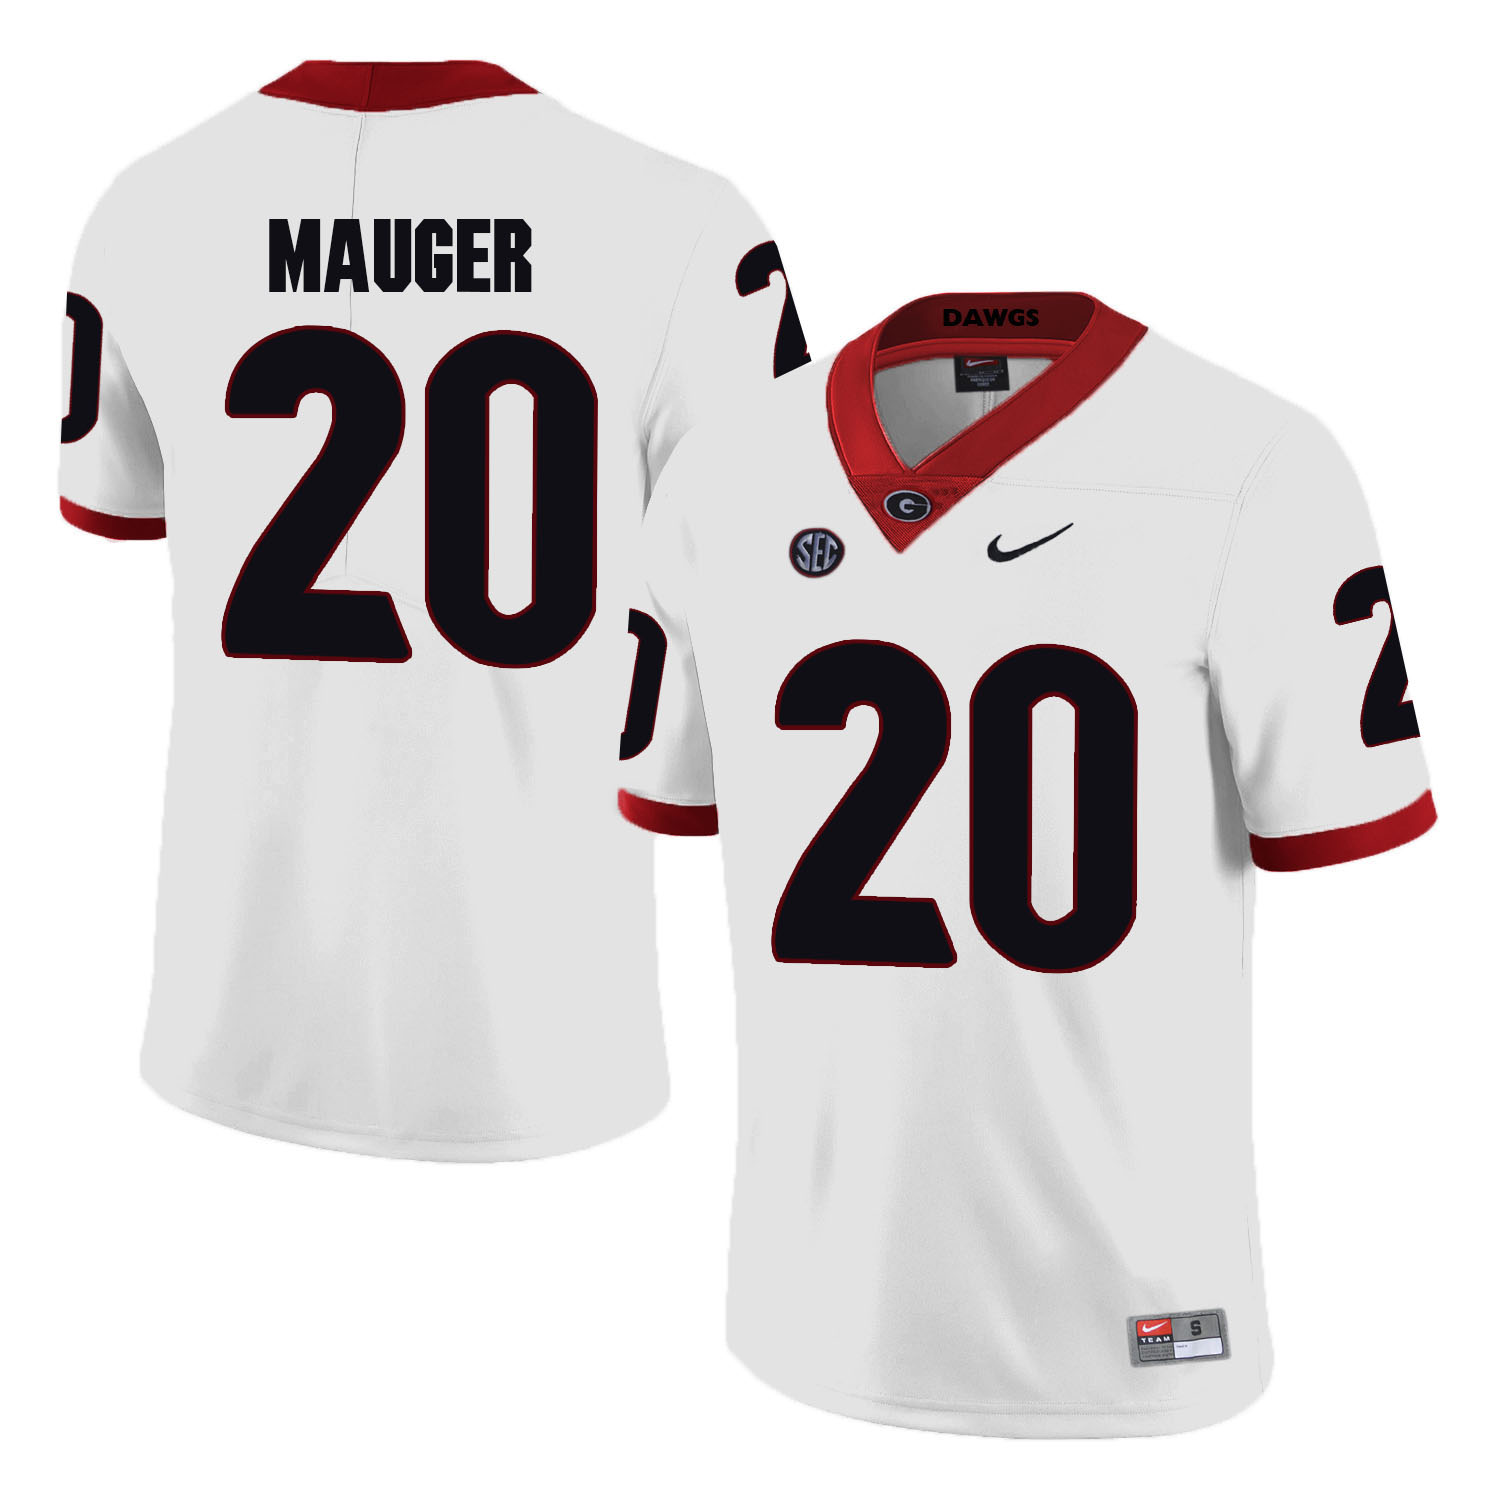 Georgia Bulldogs 20 Quincy Mauger White College Football Jersey